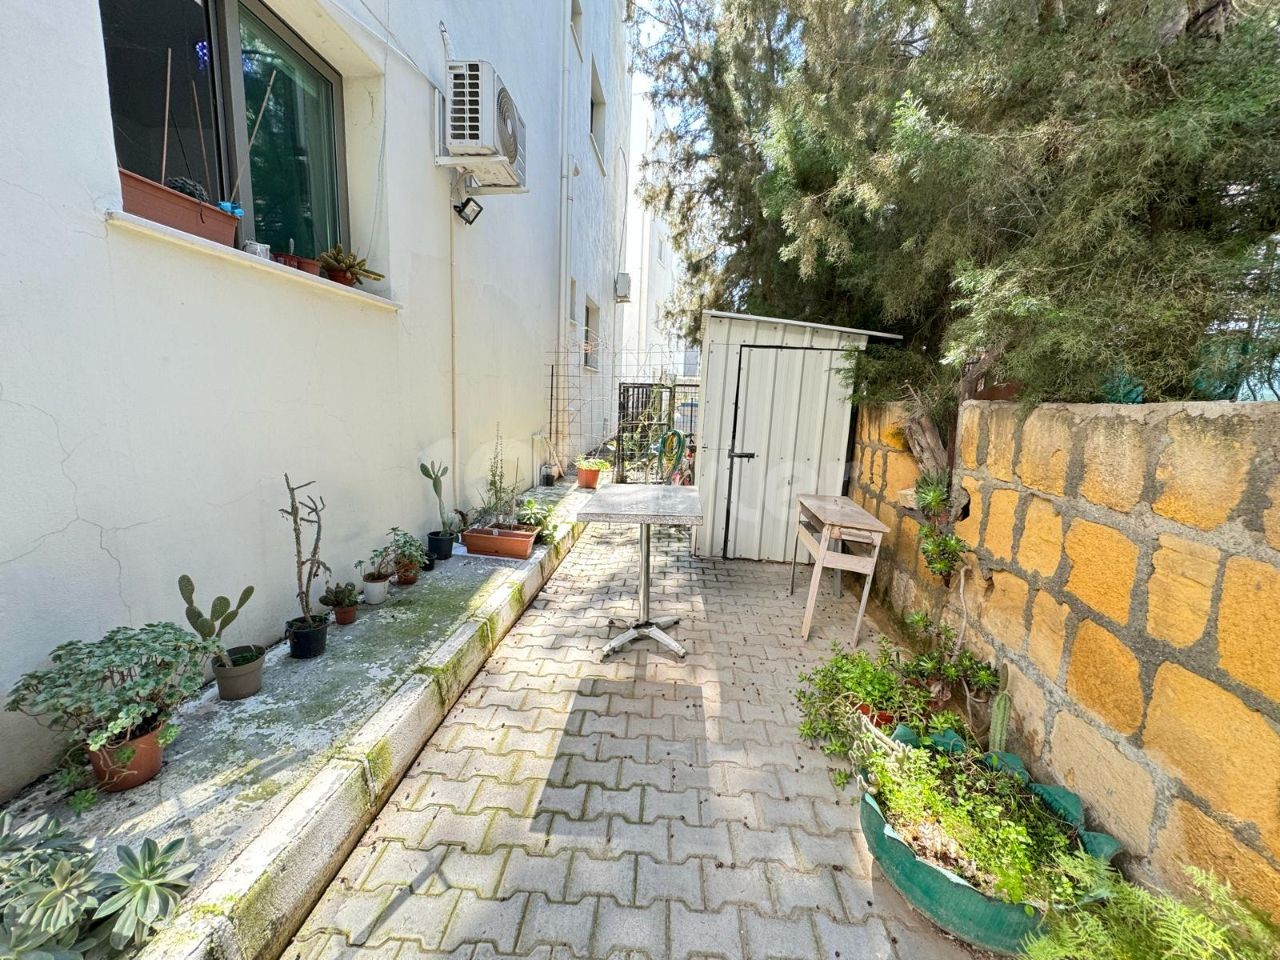 GROUND FLOOR 2+1 Flat FOR SALE with Large Garden Area in Nicosia Yenikent Area!